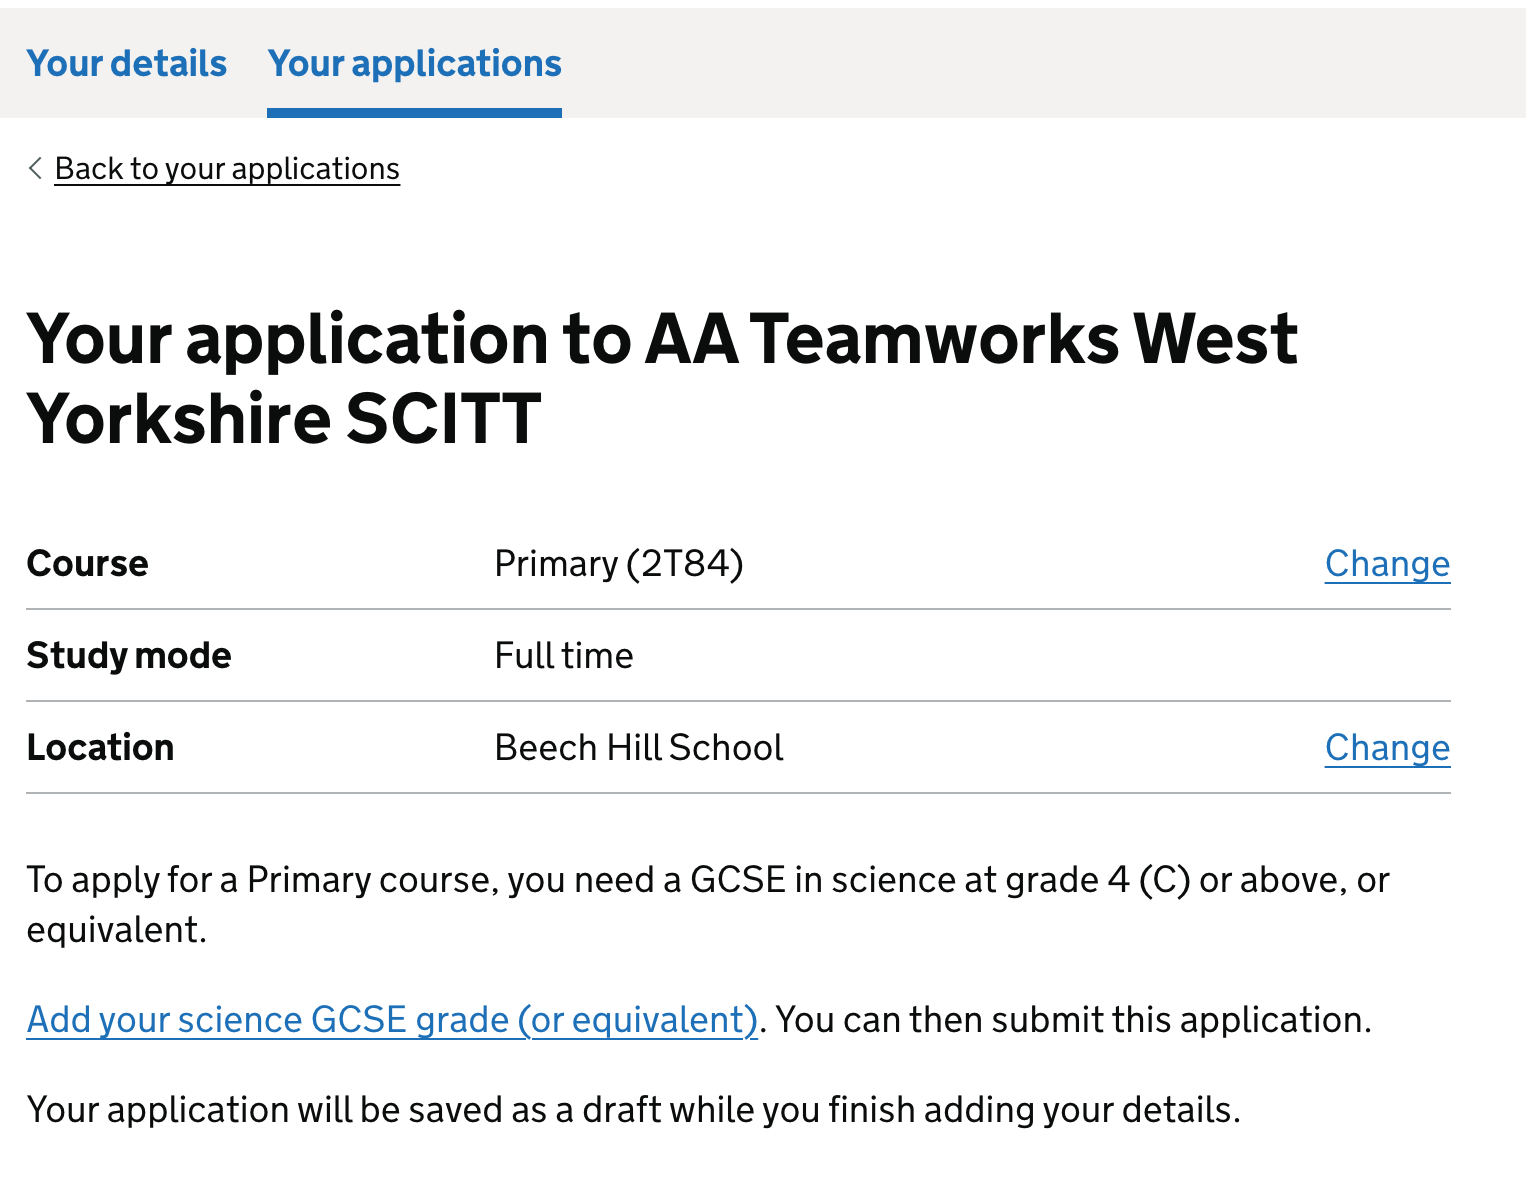 Screenshot of the summary of the provider and course a candidate is applying to in a summary list. Below this is content telling the candidate they cannot submit their application because they need to add information about their science GCSE or equivalent.